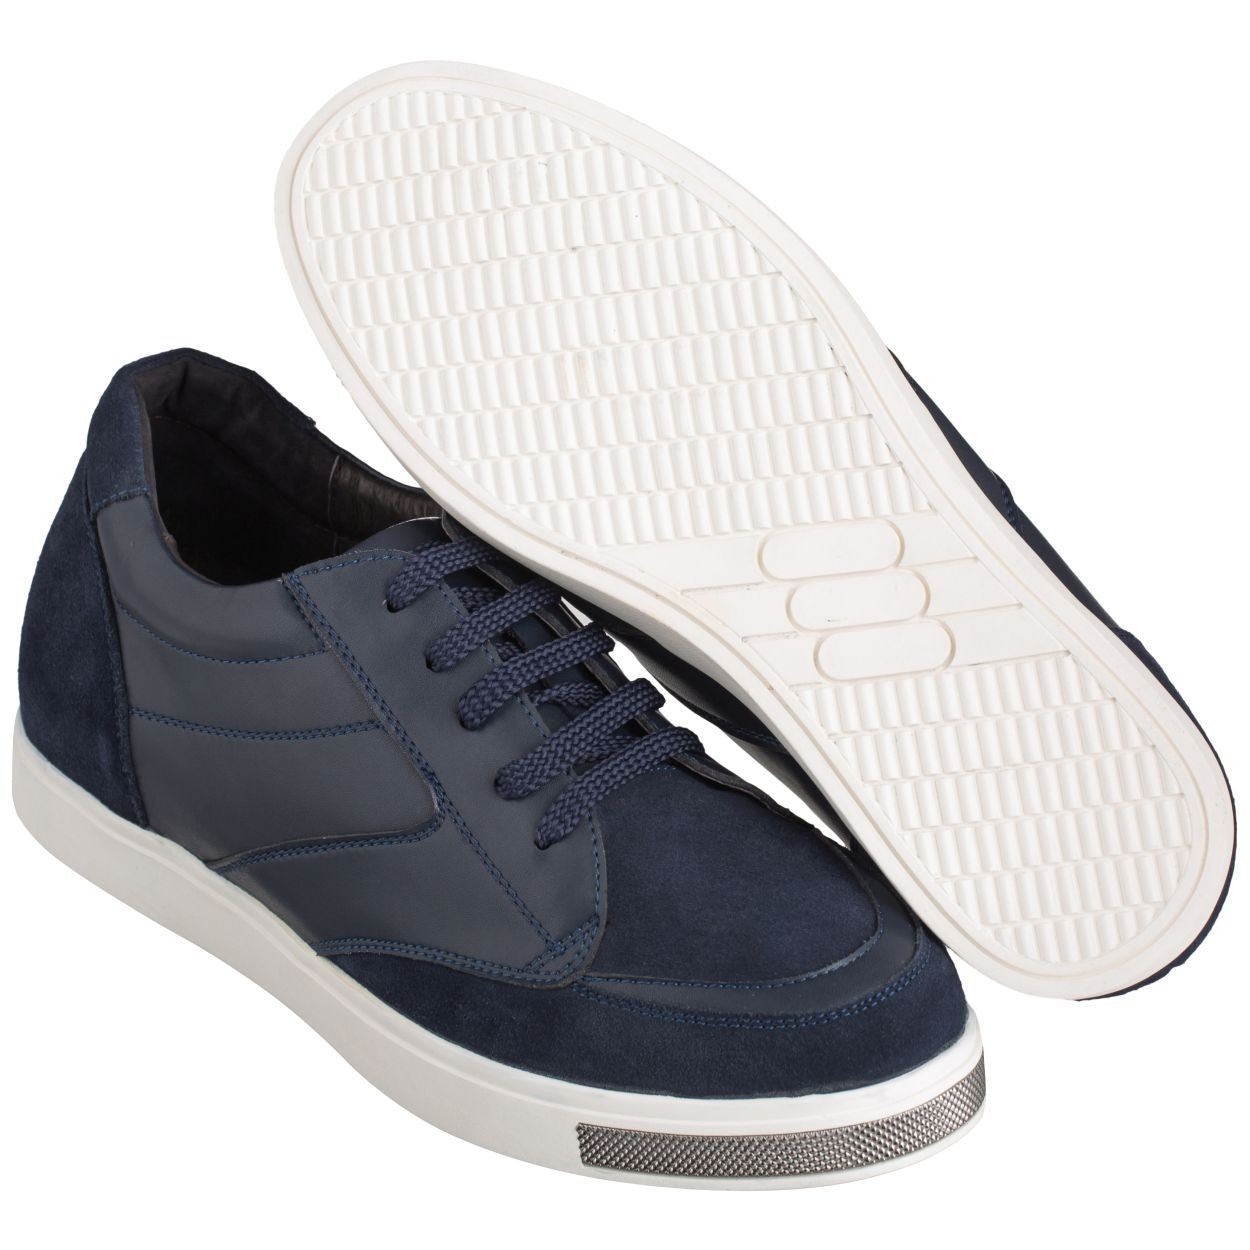 Elevator shoes height increase CALTO - Y26152 - 2.4 Inches Taller (Dark Blue)